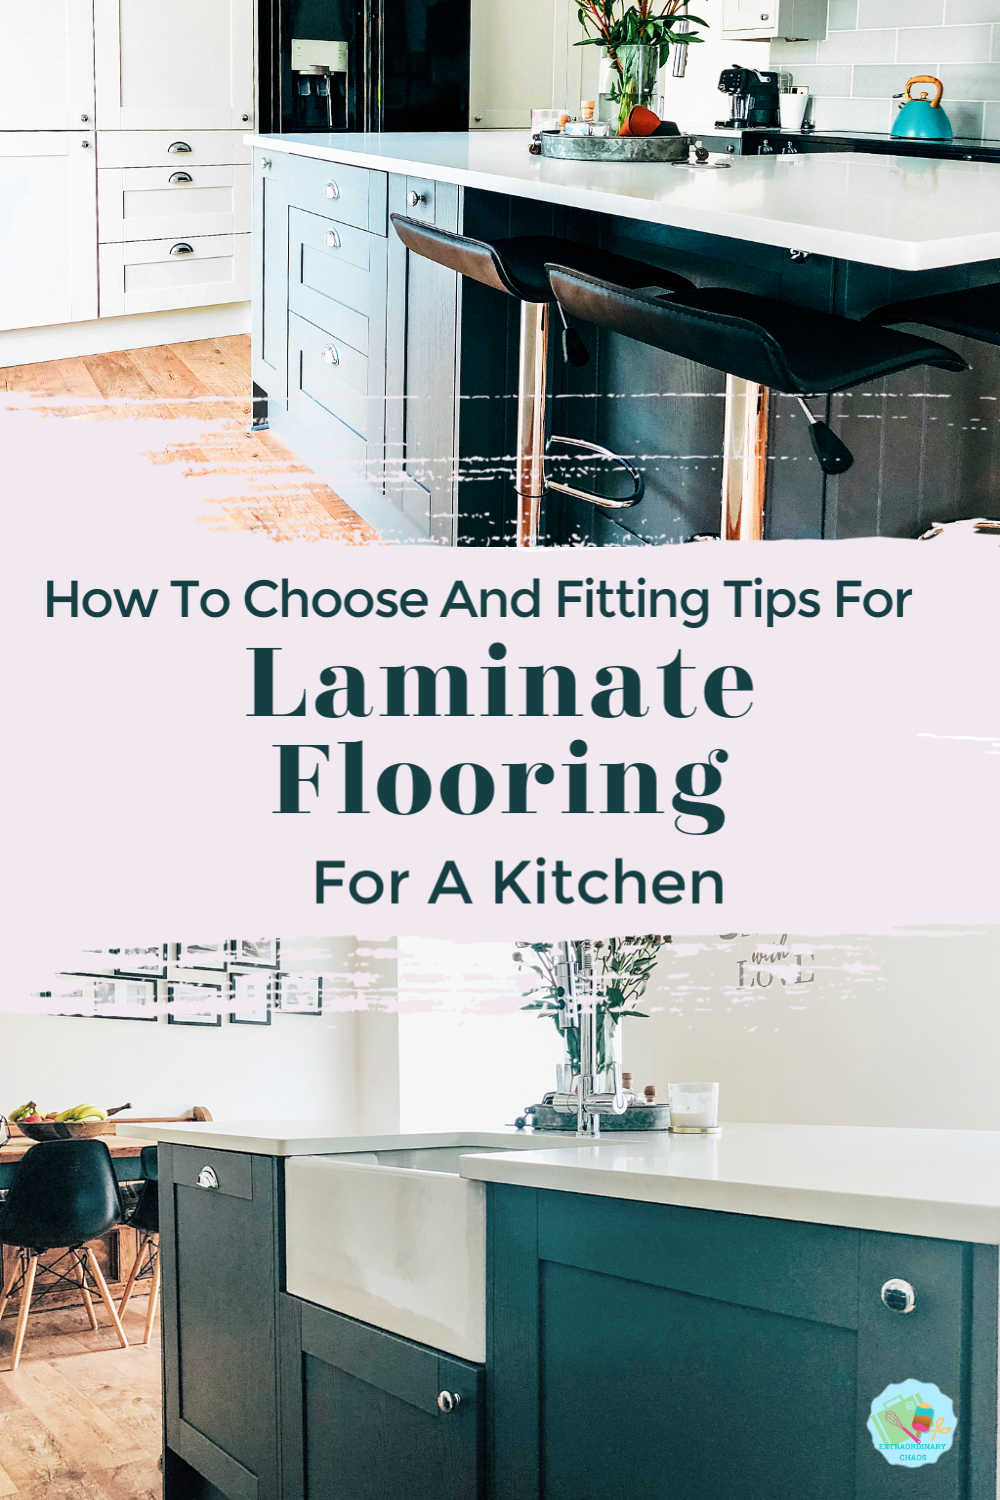 How to choose wood effect laminate flooring for a kitchen and is it a practical kitchen floor option for families with kids and pets